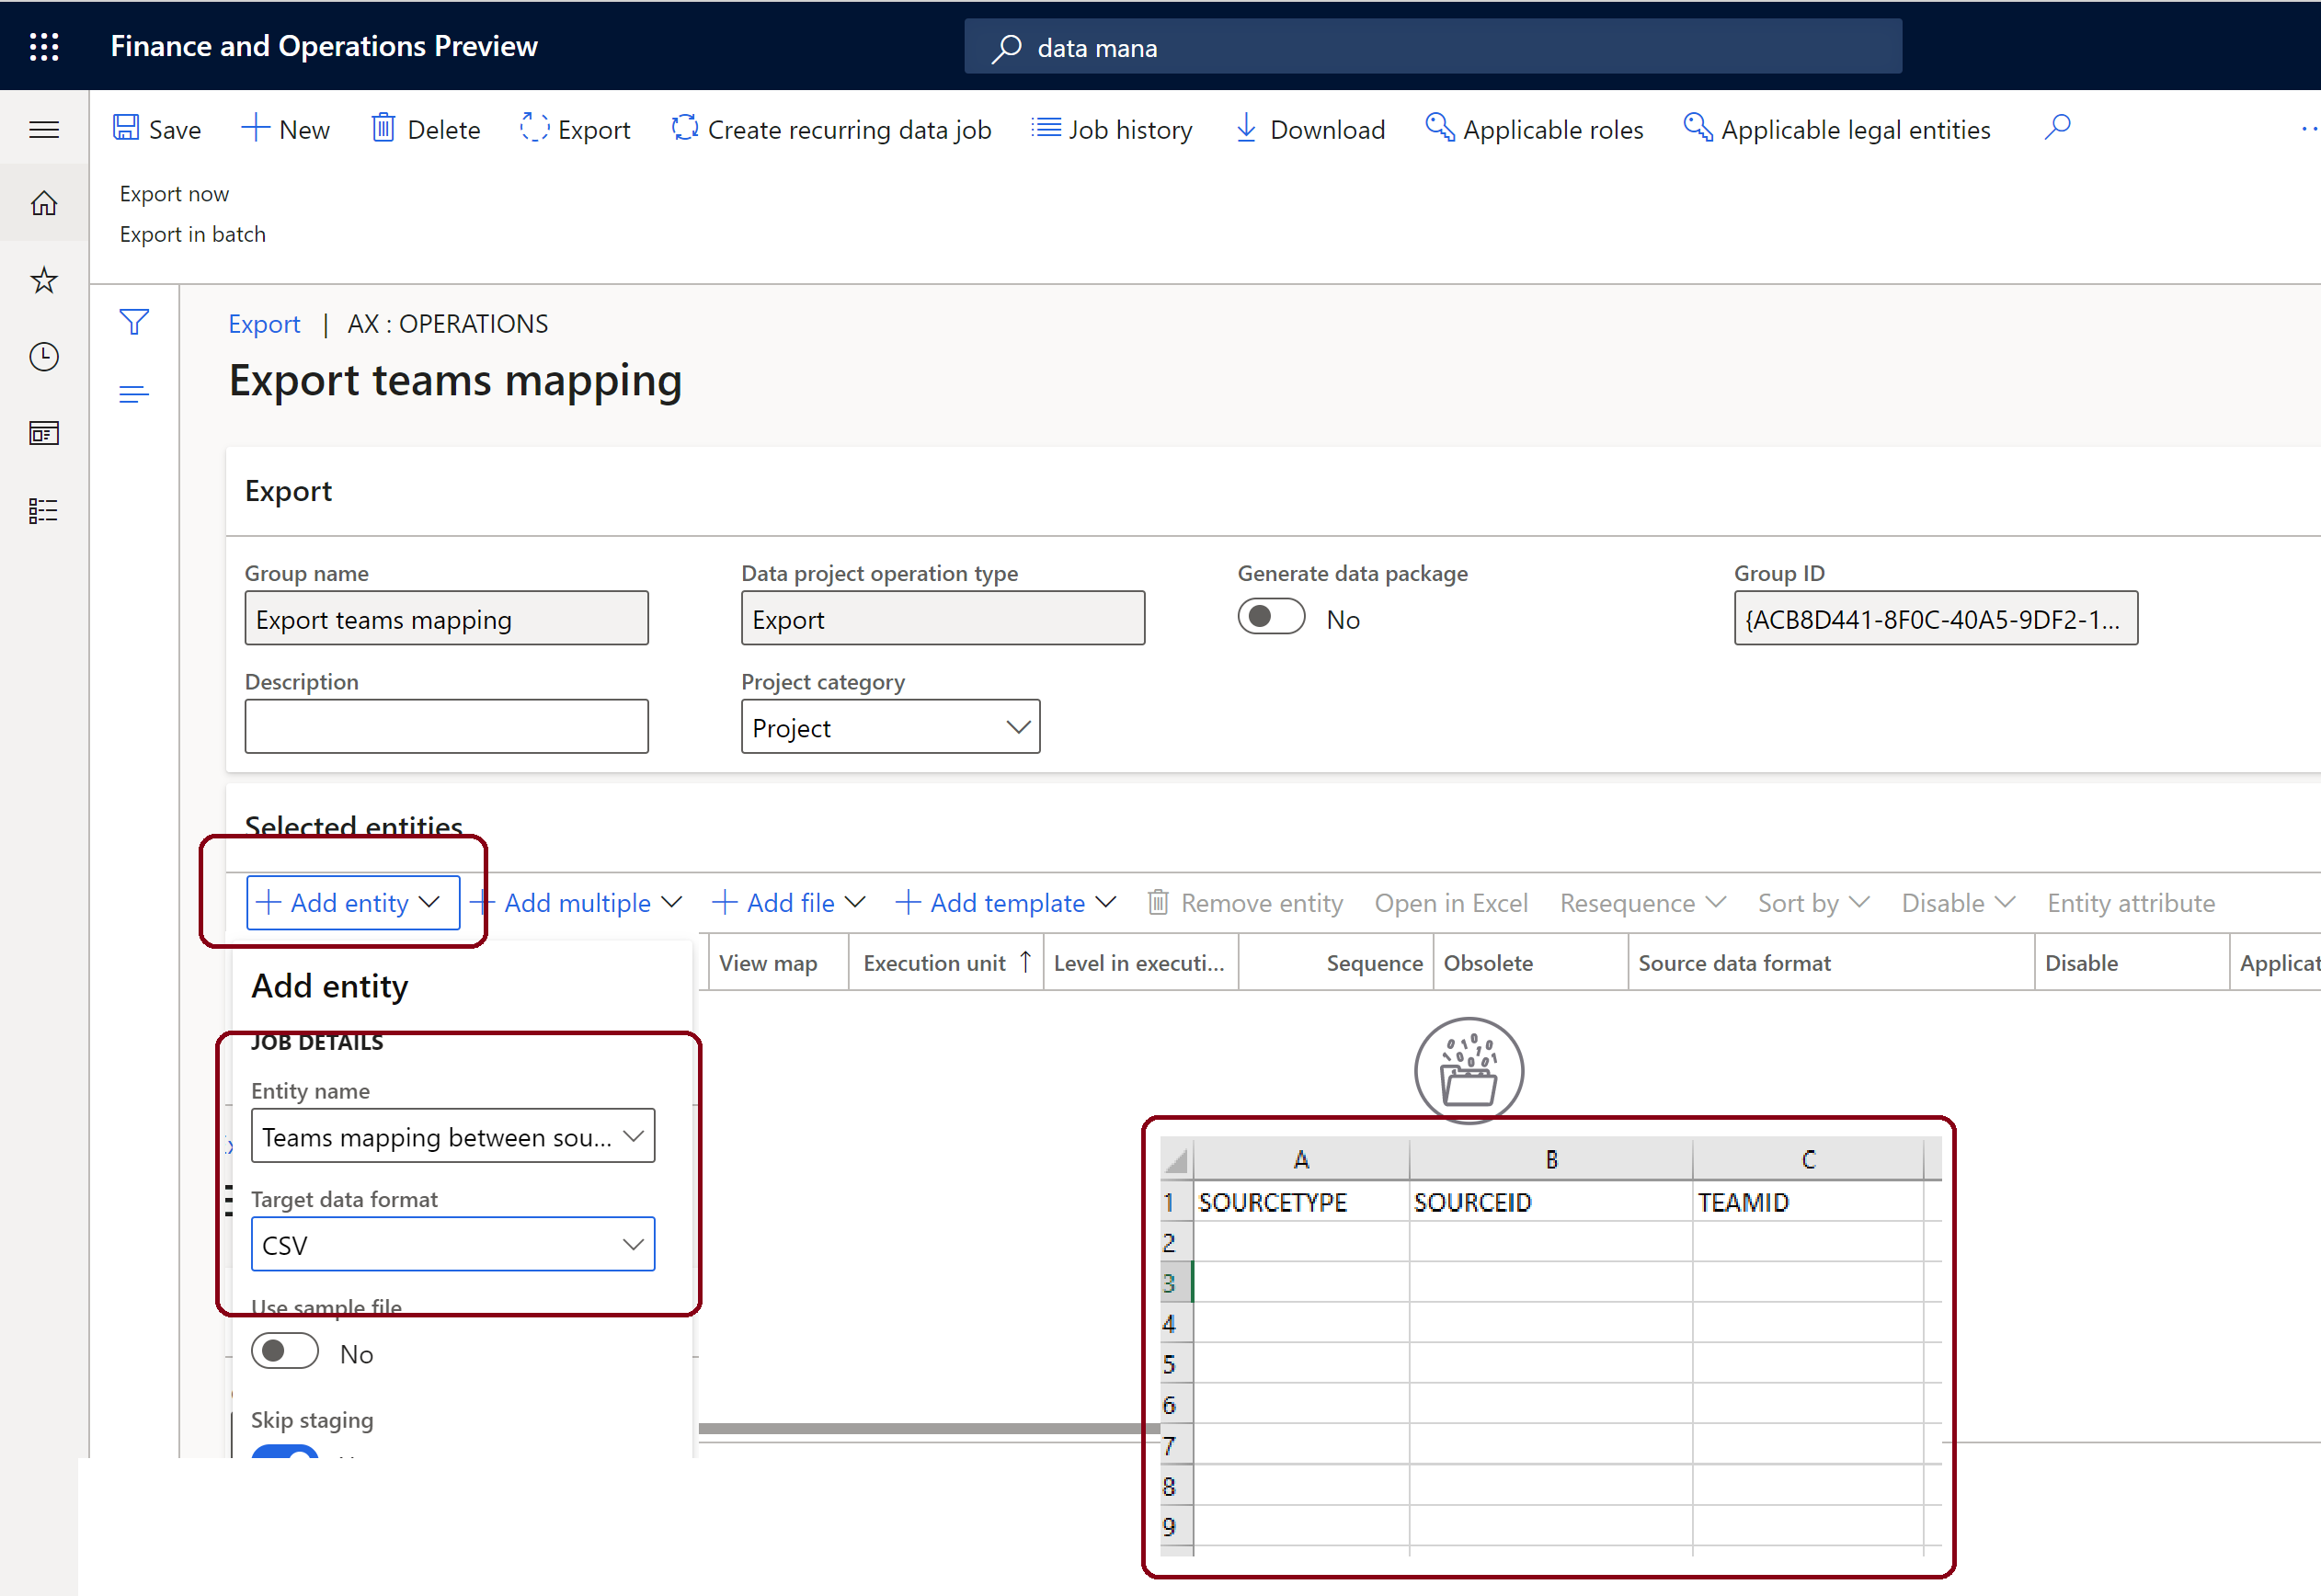 Export teams mapping group in Commerce with add entity elements and the exported CSV file headers highlighted.